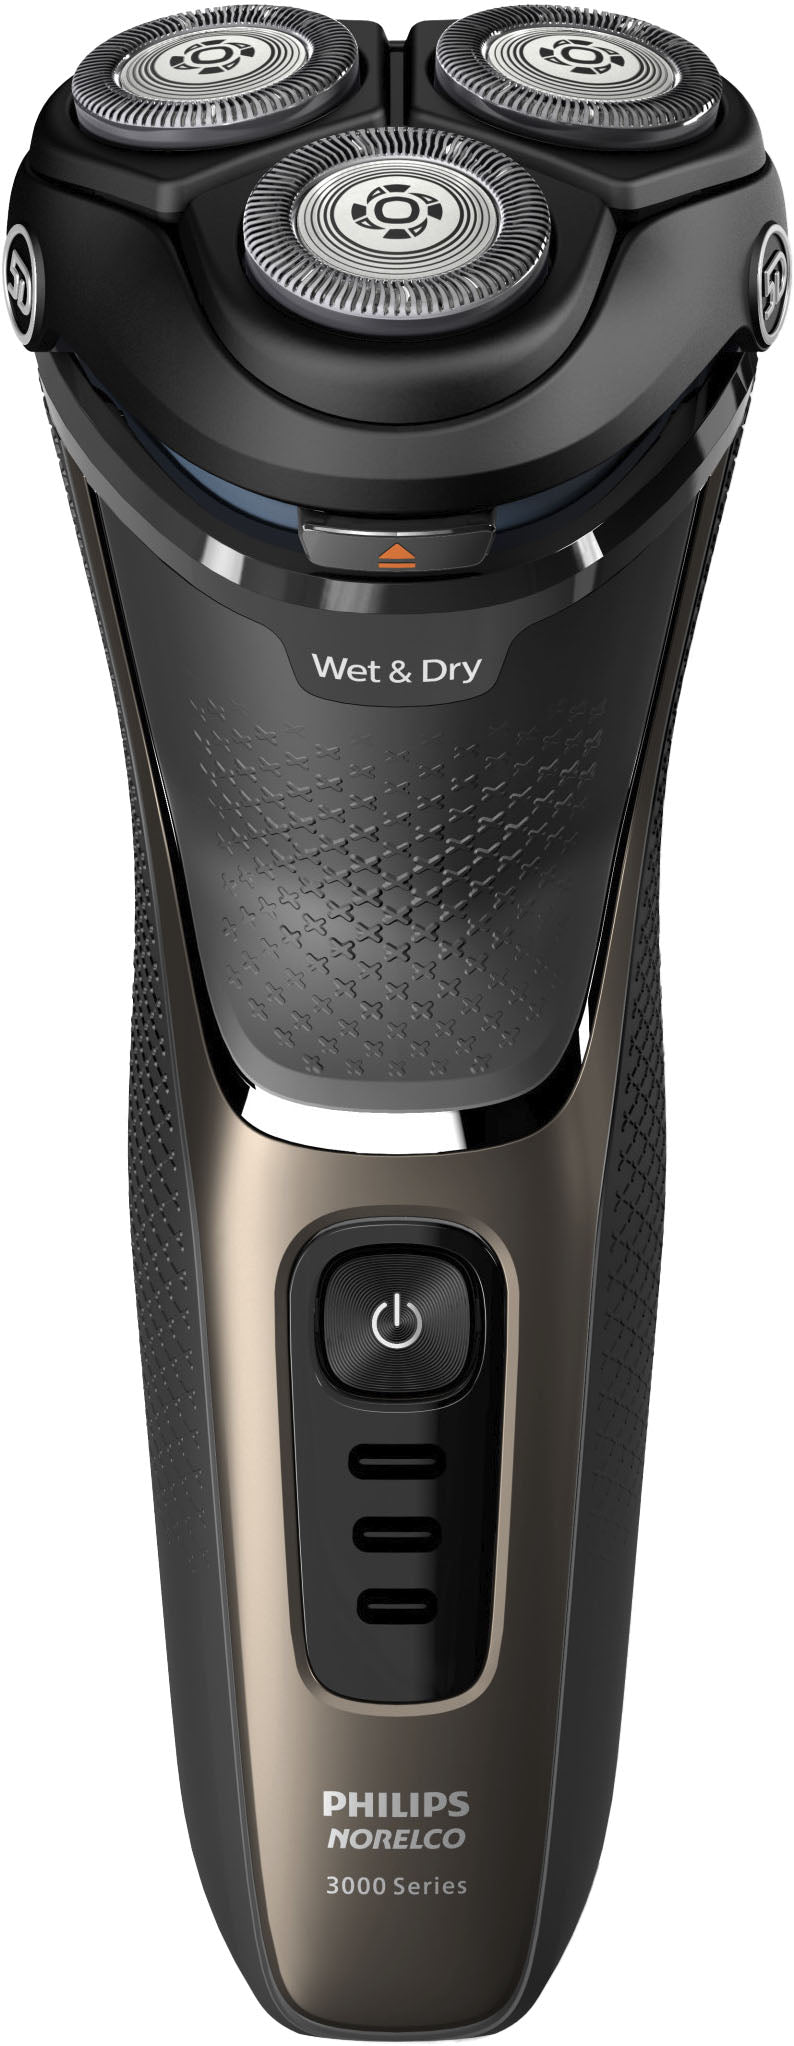 Philips Norelco CareTouch, Rechargeable Wet/Dry Electric Shaver with Pop-Up Trimmer - Ash Gold_0